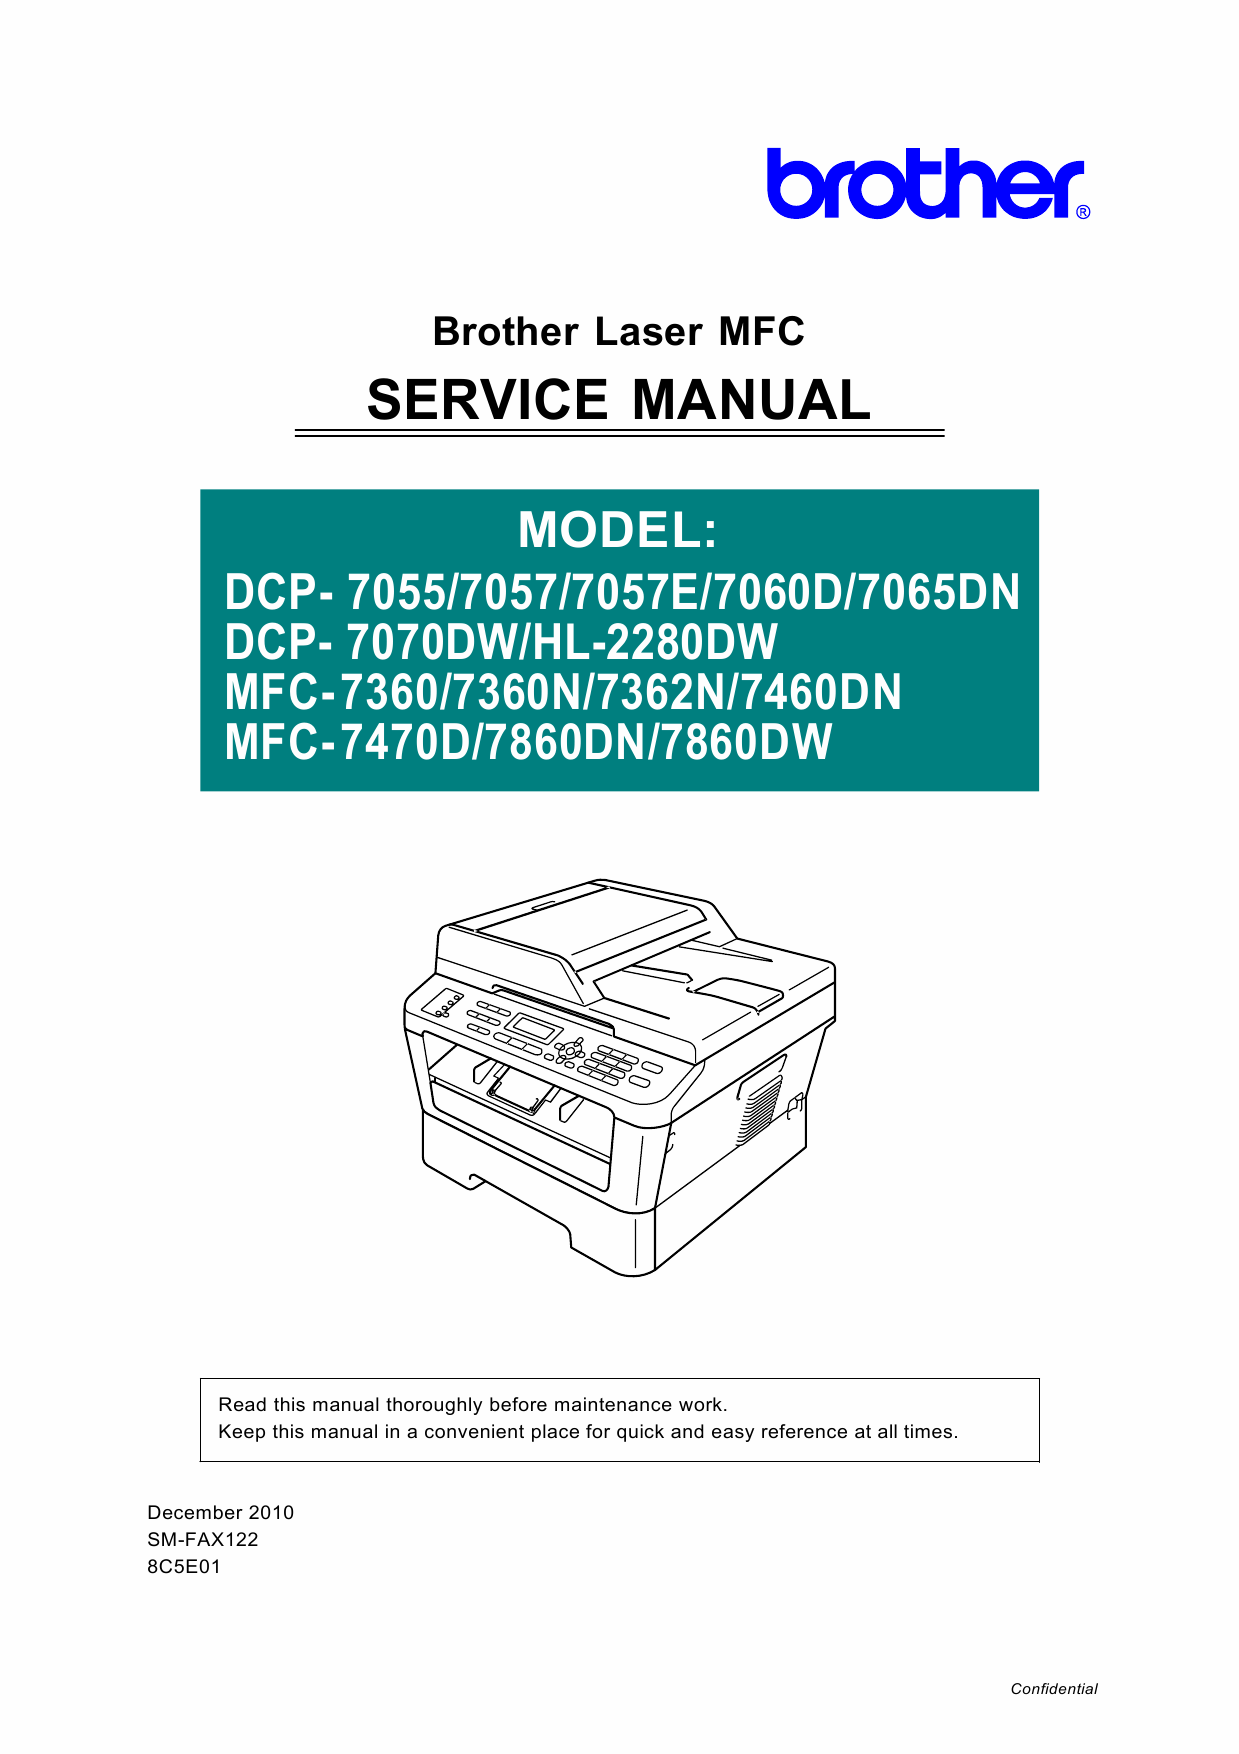 Brother Laser-MFC 7360 7362 7460 7470 7860 N D DN DCP7055 7057E 7060D 7065DN 7070DW HL2280 Service Manual and Parts-1